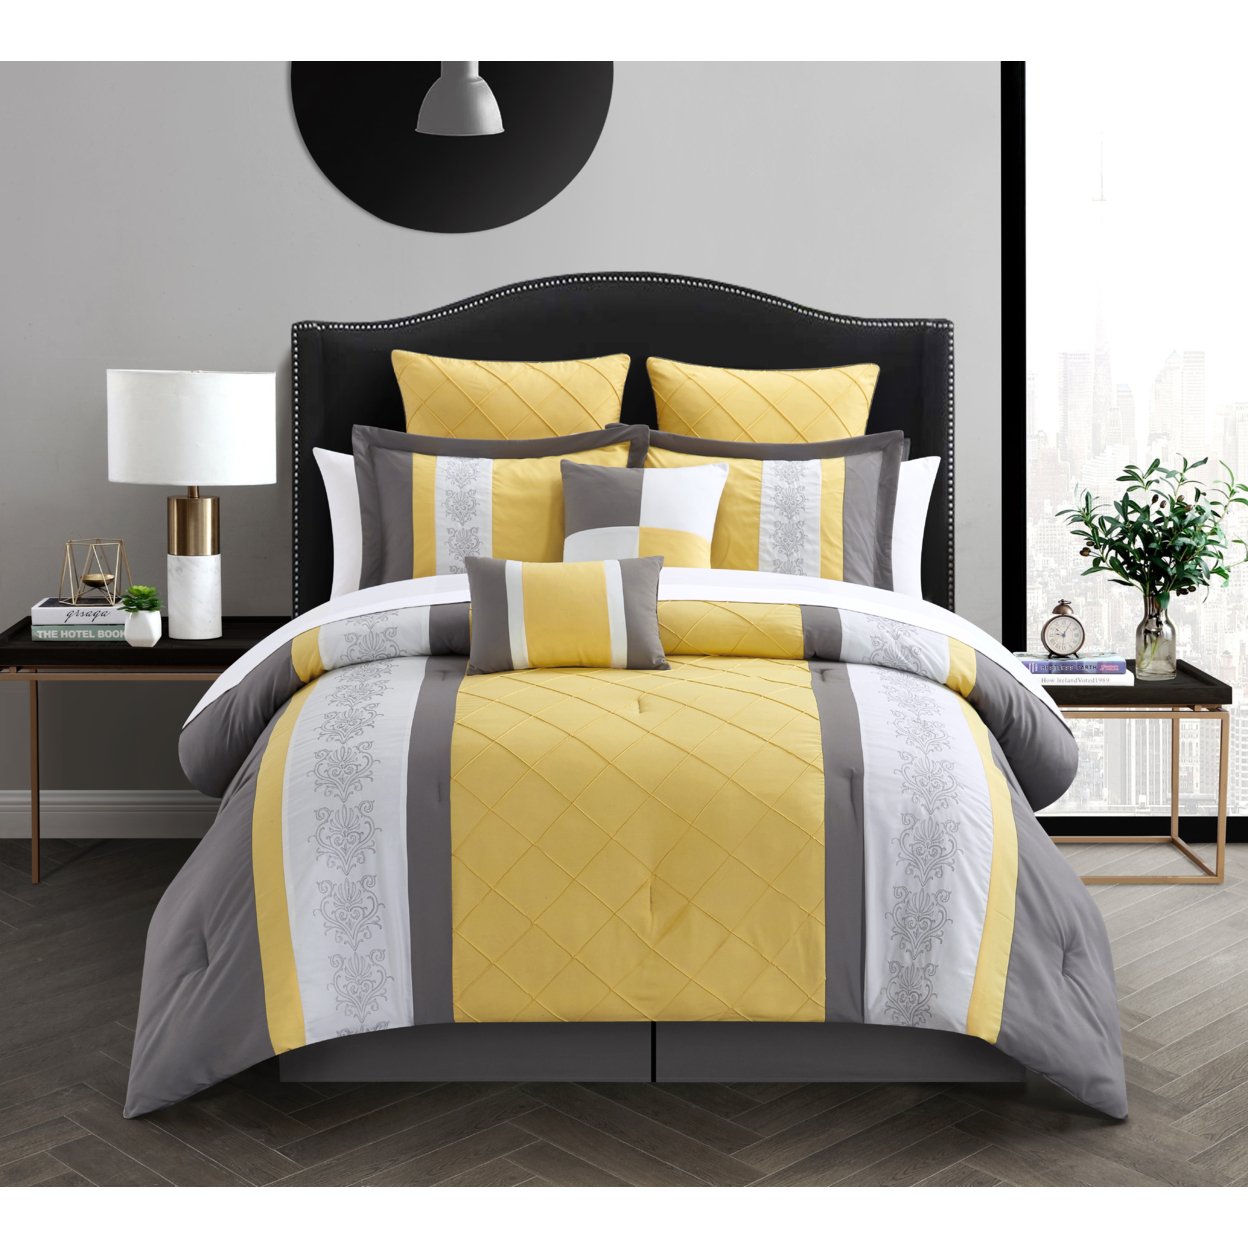 Livingston Oversized And Overfilled Comforter Set (8-Piece) - Yellow, King